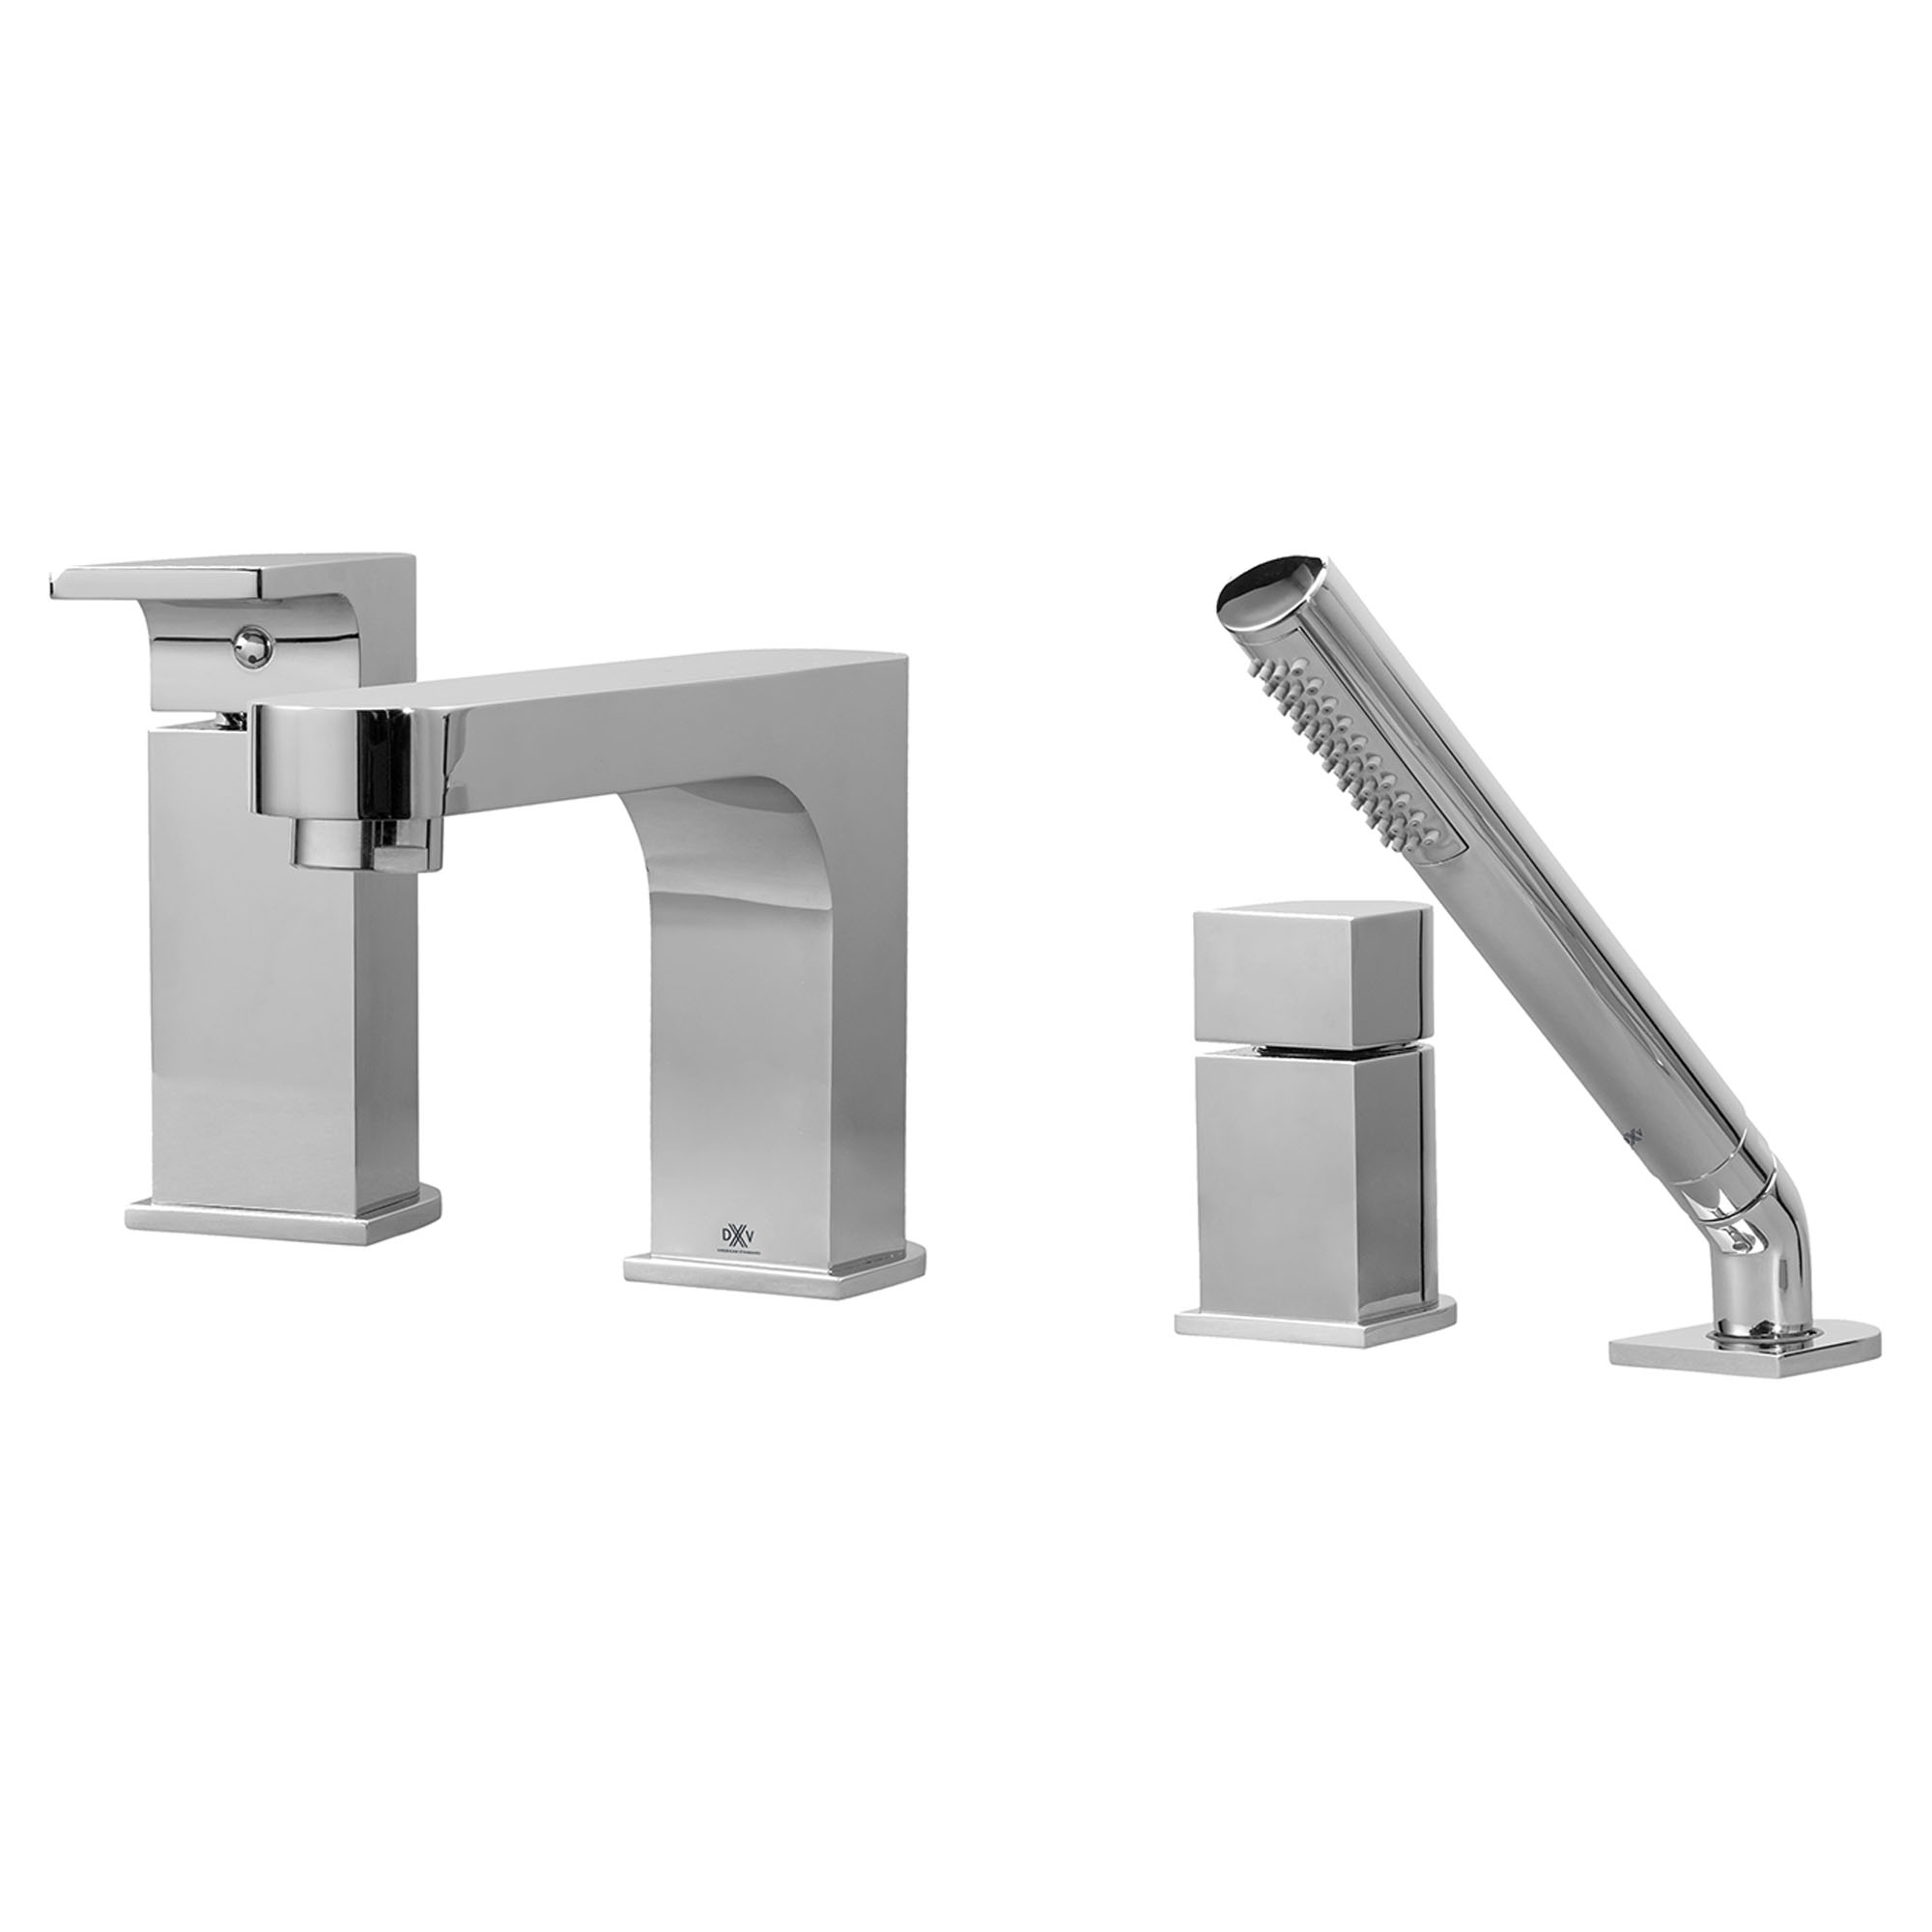 Equility Single Handle Deck Mount Bathtub Faucet with Hand Shower and Lever Handle